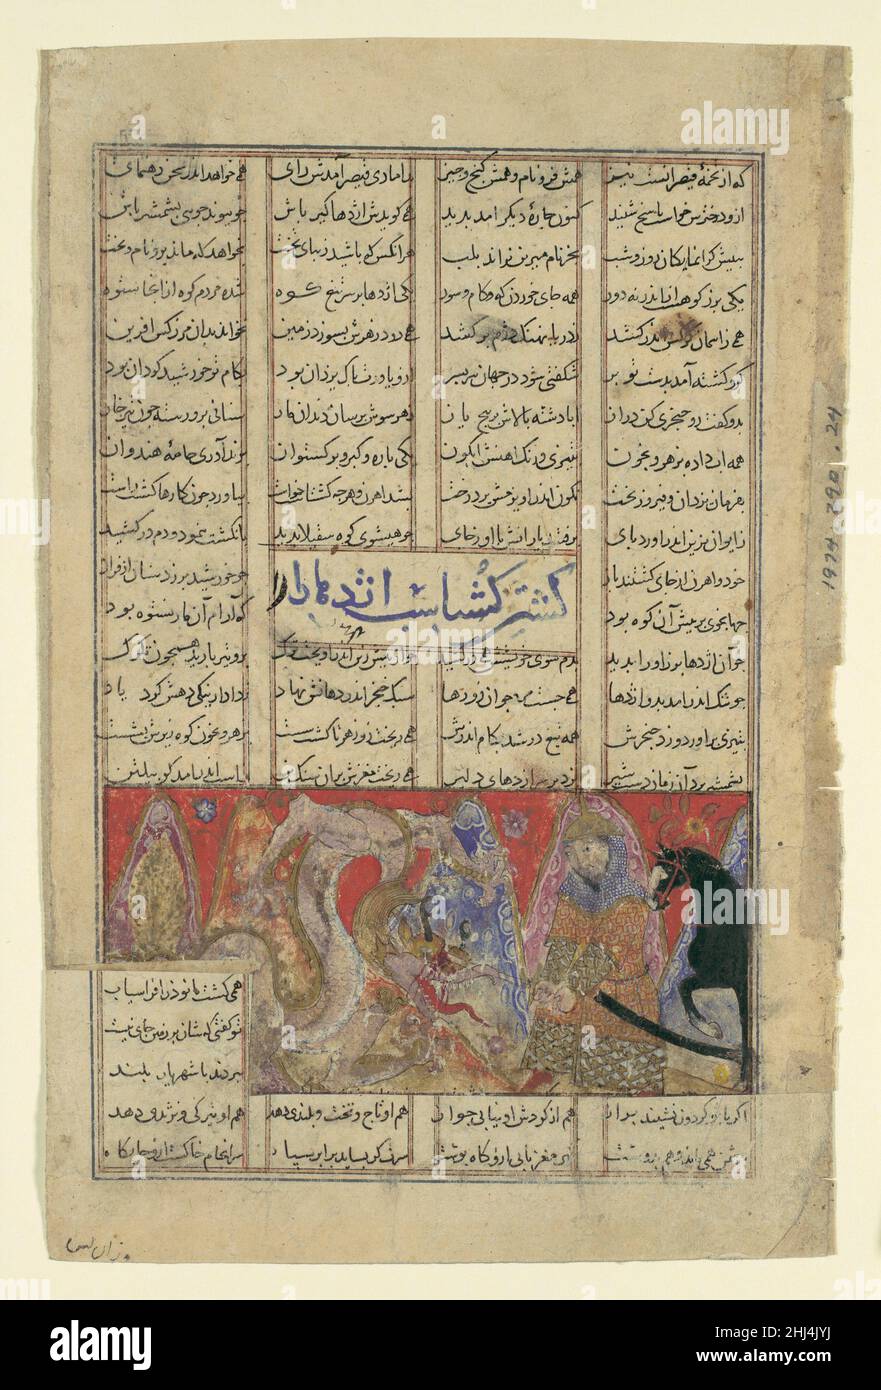 'Gushtasp Slays the Dragon of Mount Saqila', Folio from a Shahnama (Book of Kings) of Firdausi ca. 1330–40 Abu'l Qasim Firdausi Gushtasp, Prince of Iran, was living in disguise in Rum. In order to win the hand of Caesar's youngest daughter he had to perform a mighty feat - slay the terrible dragon of Mount Saqila. By his courage and prowess Gushtasp prevailed and killed the monster. The dragon takes up two thirds of the composition, its writhing form exuding might and menace. Adding to the dramatic tension, Gushtasp is shown to be in a restricted space from which there appears to be no escape Stock Photo